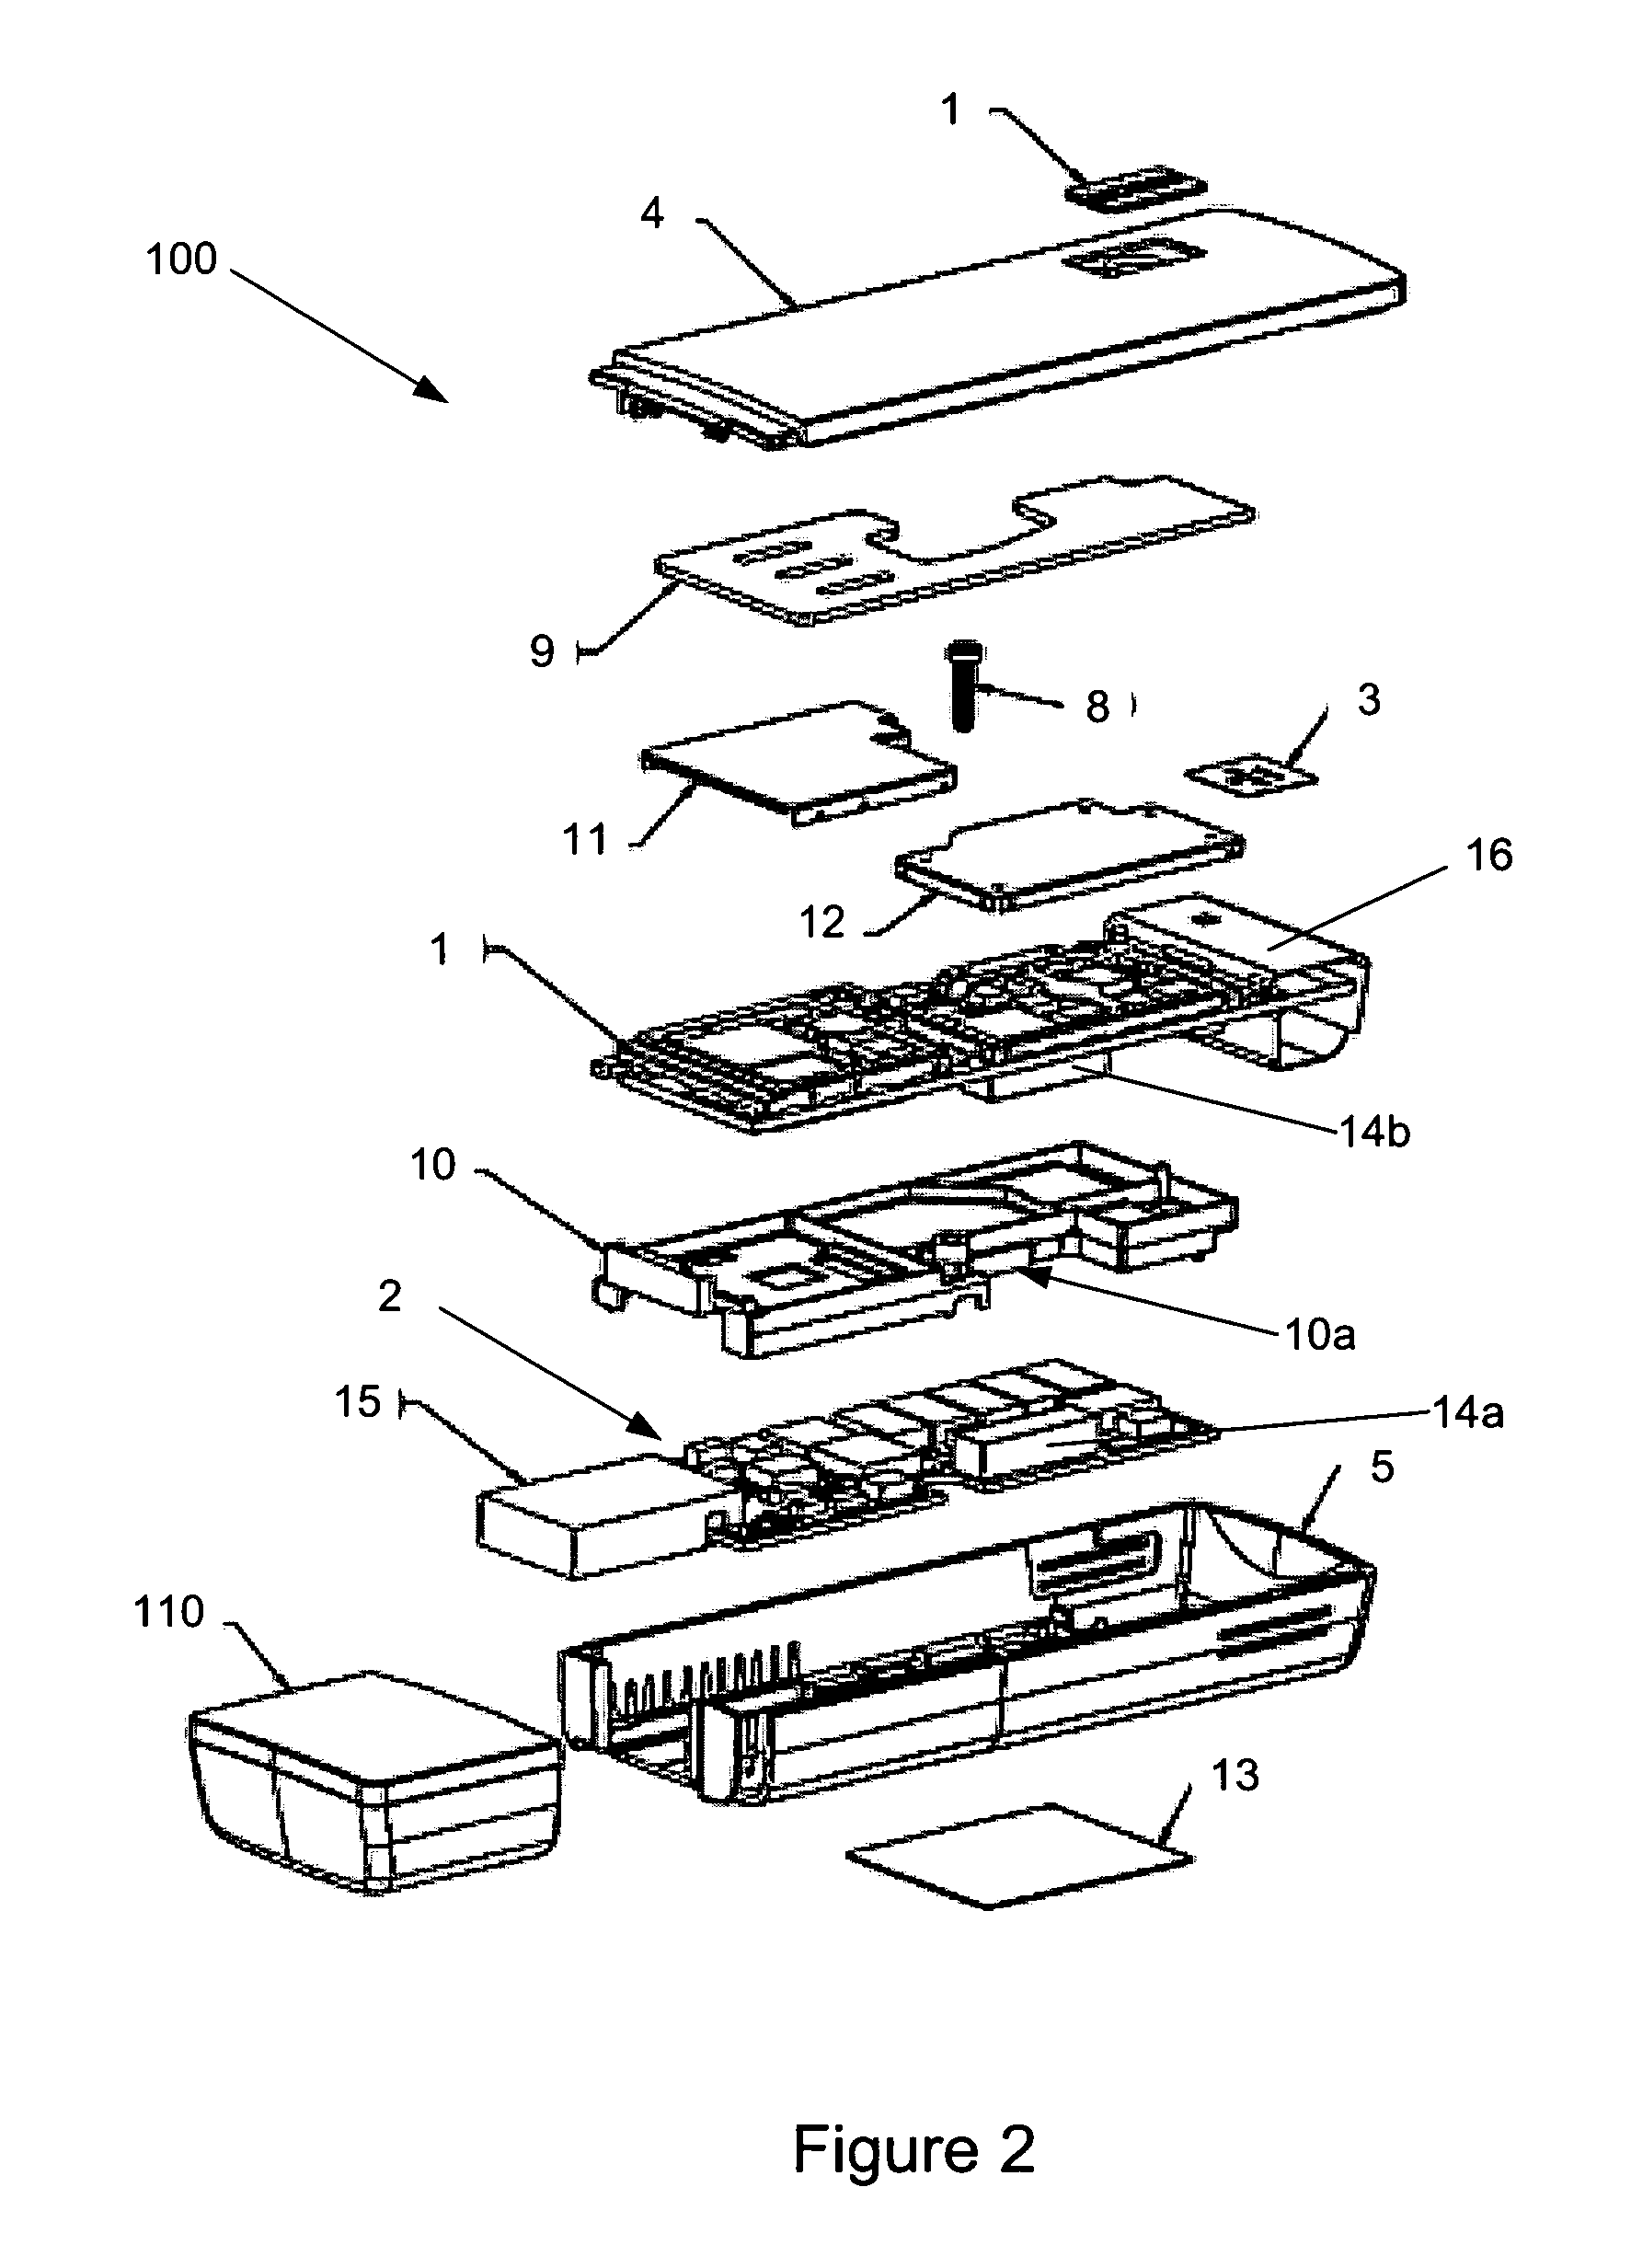 Electronic device and method of forming same